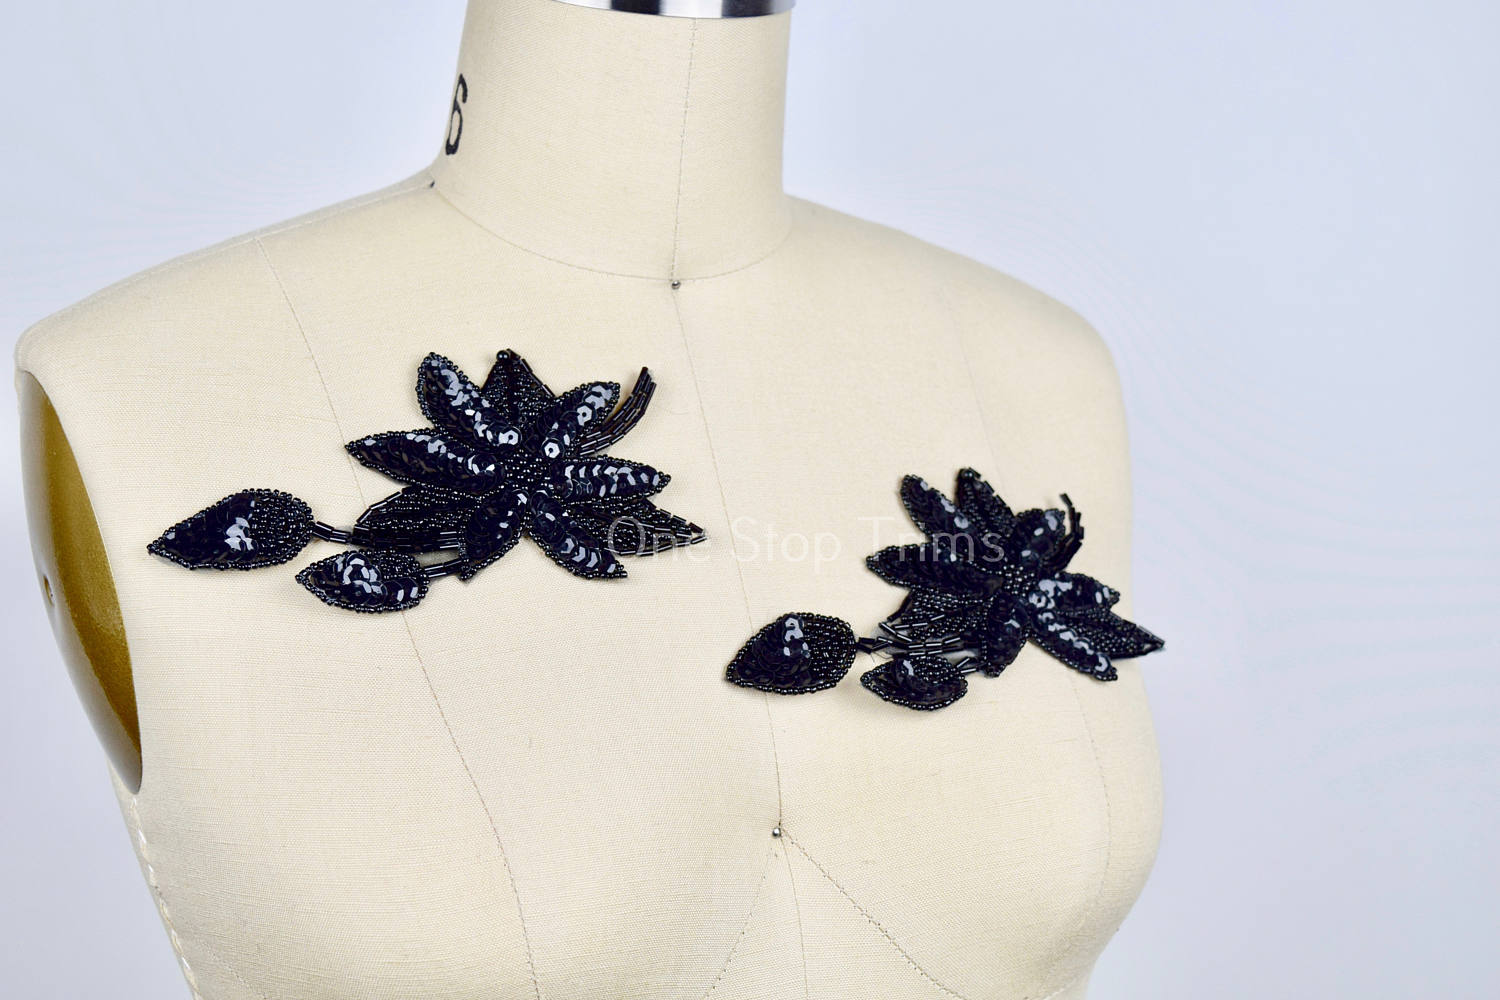 Black Beaded Applique 2 Piece Heavily Beaded Stunning Black Mirrored  Applique Set on Black Mesh with Flower Motif- CALANTHA